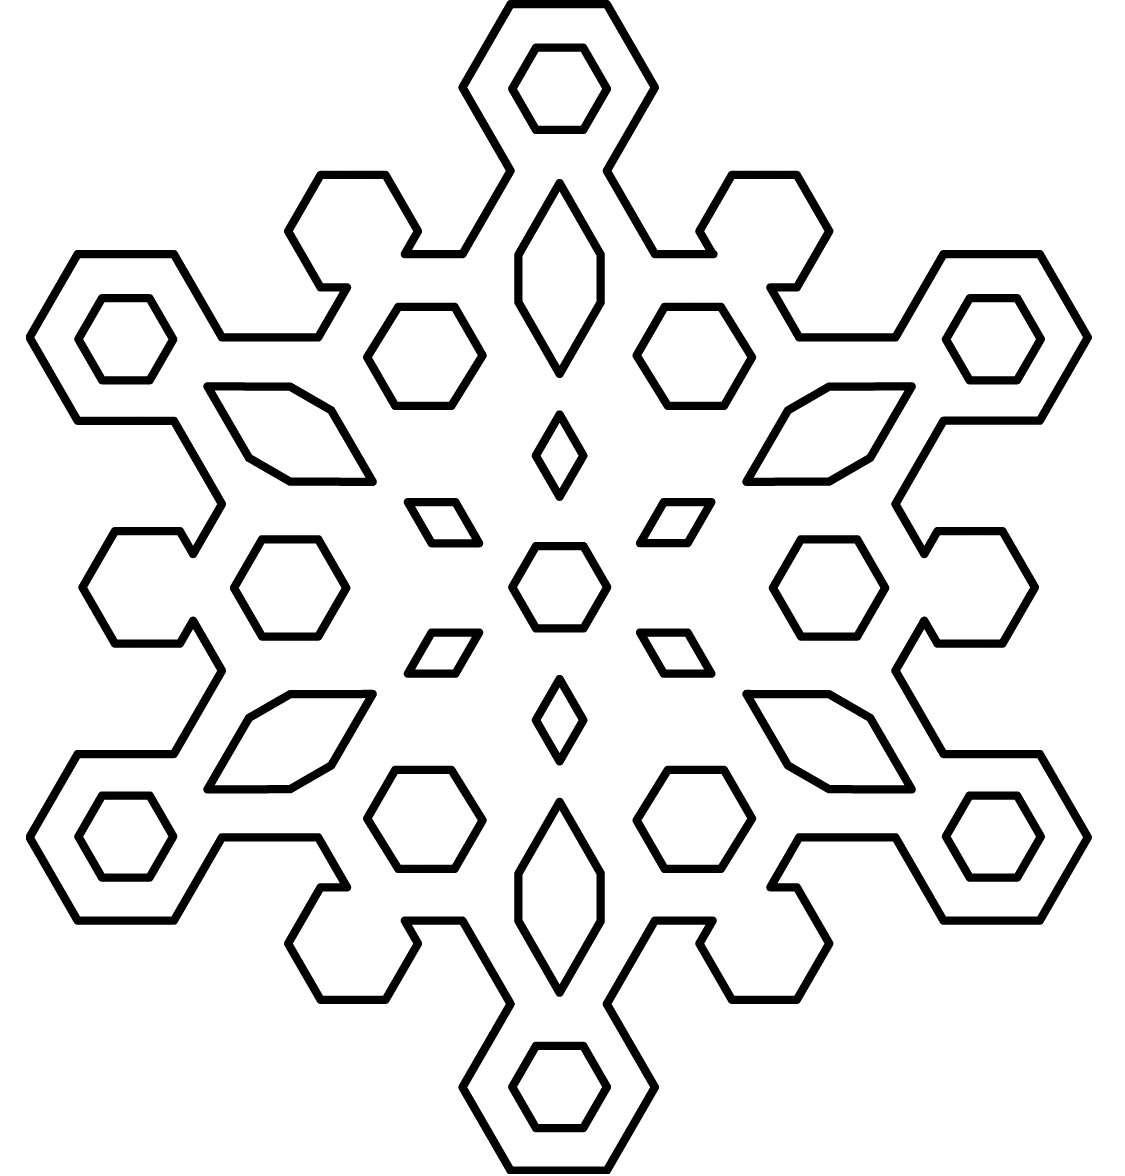 Free Printable Snowflakes Coloring Pages